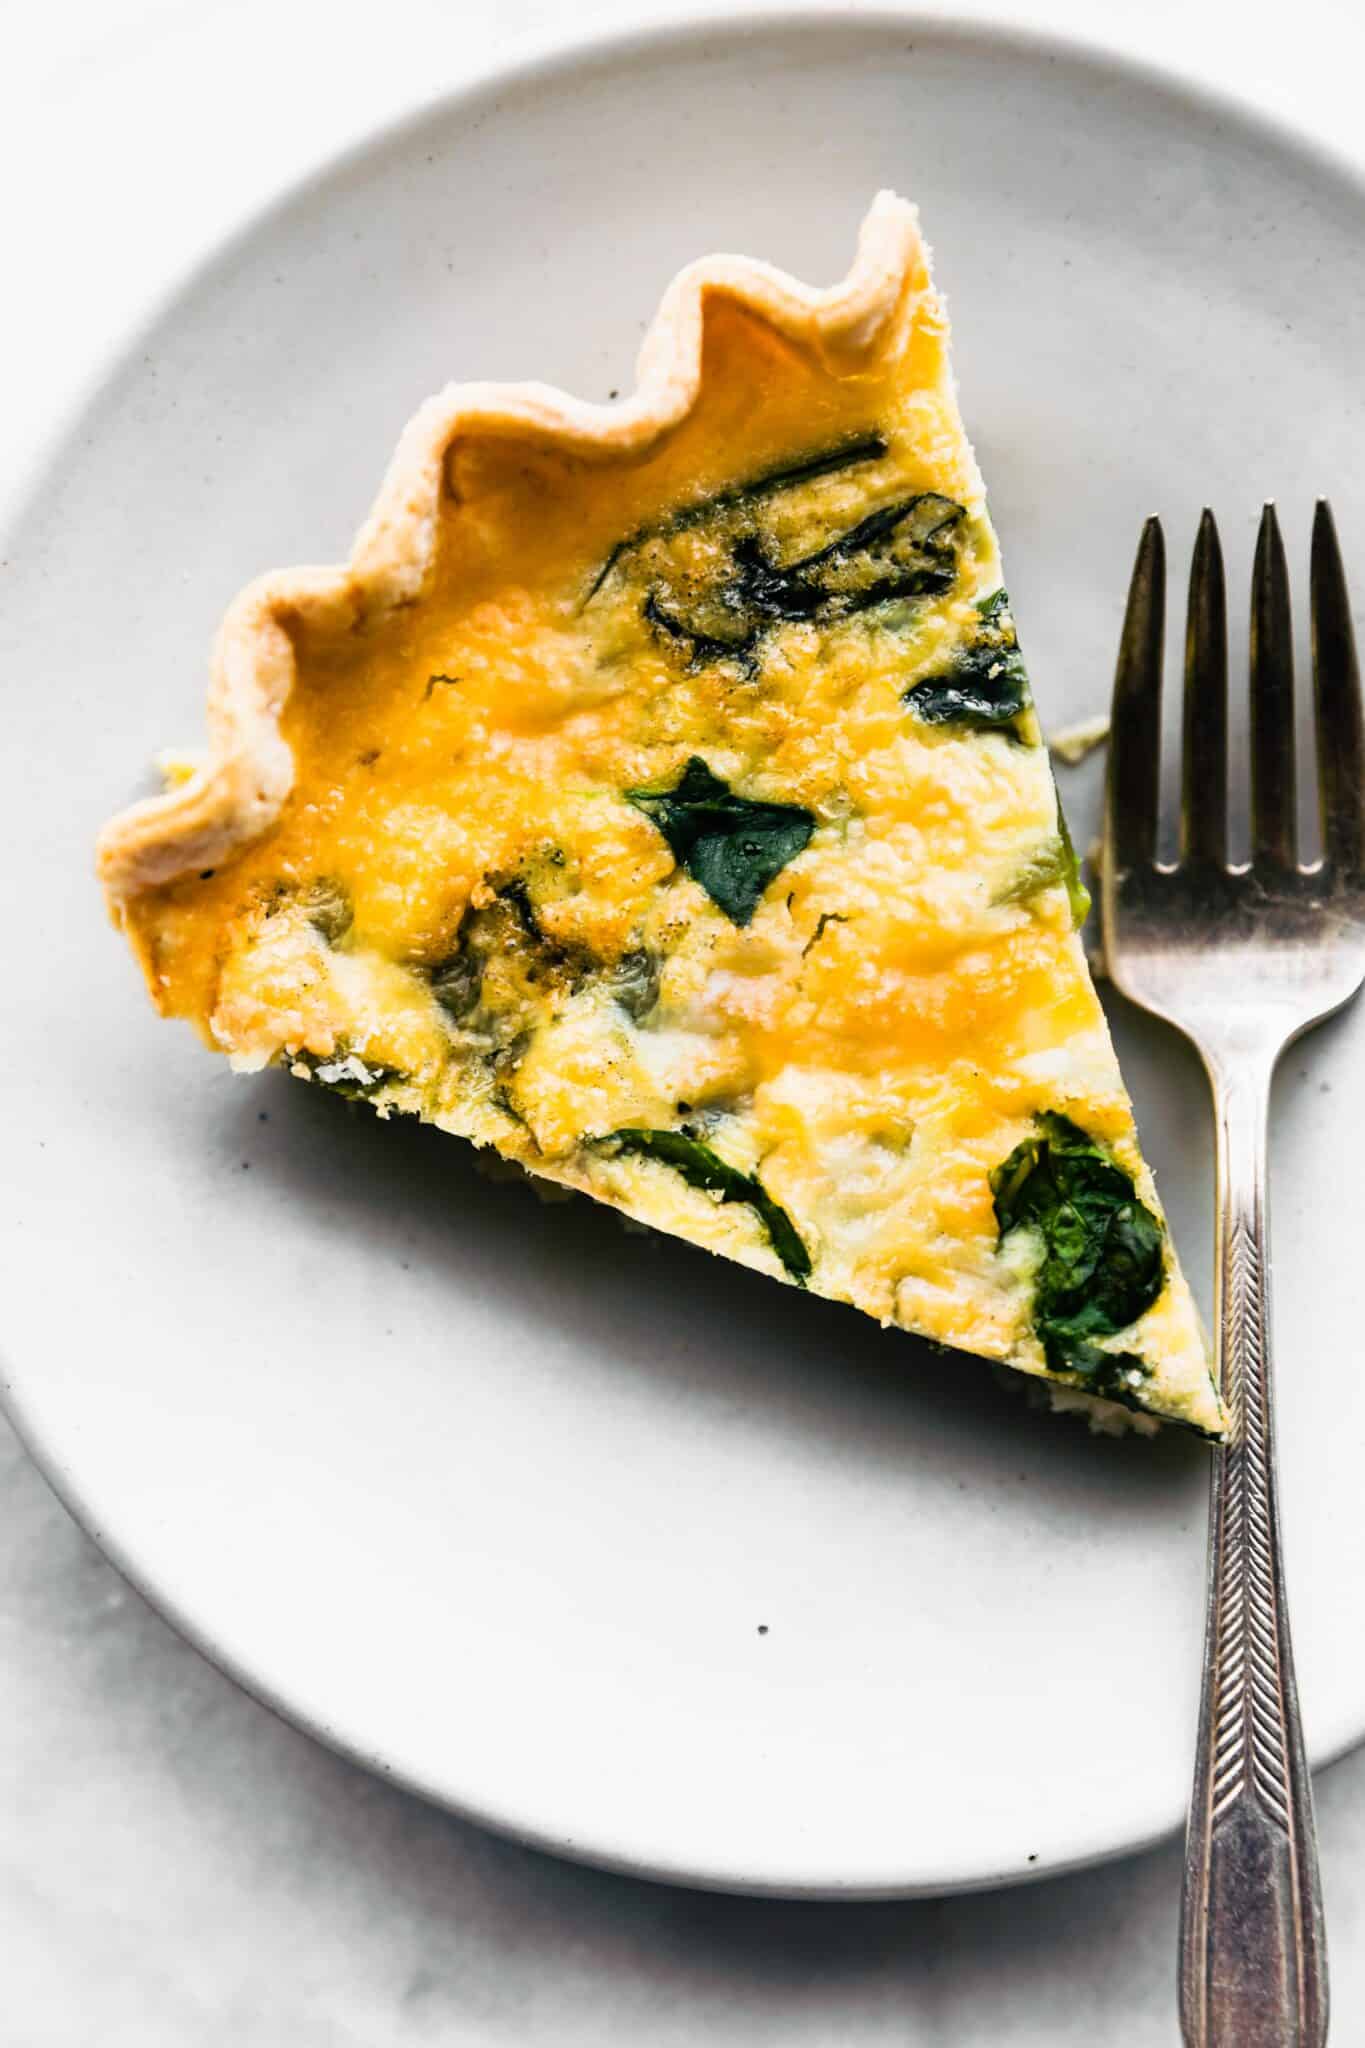 A slice of gluten free quiche on a plate with a fork beside it.